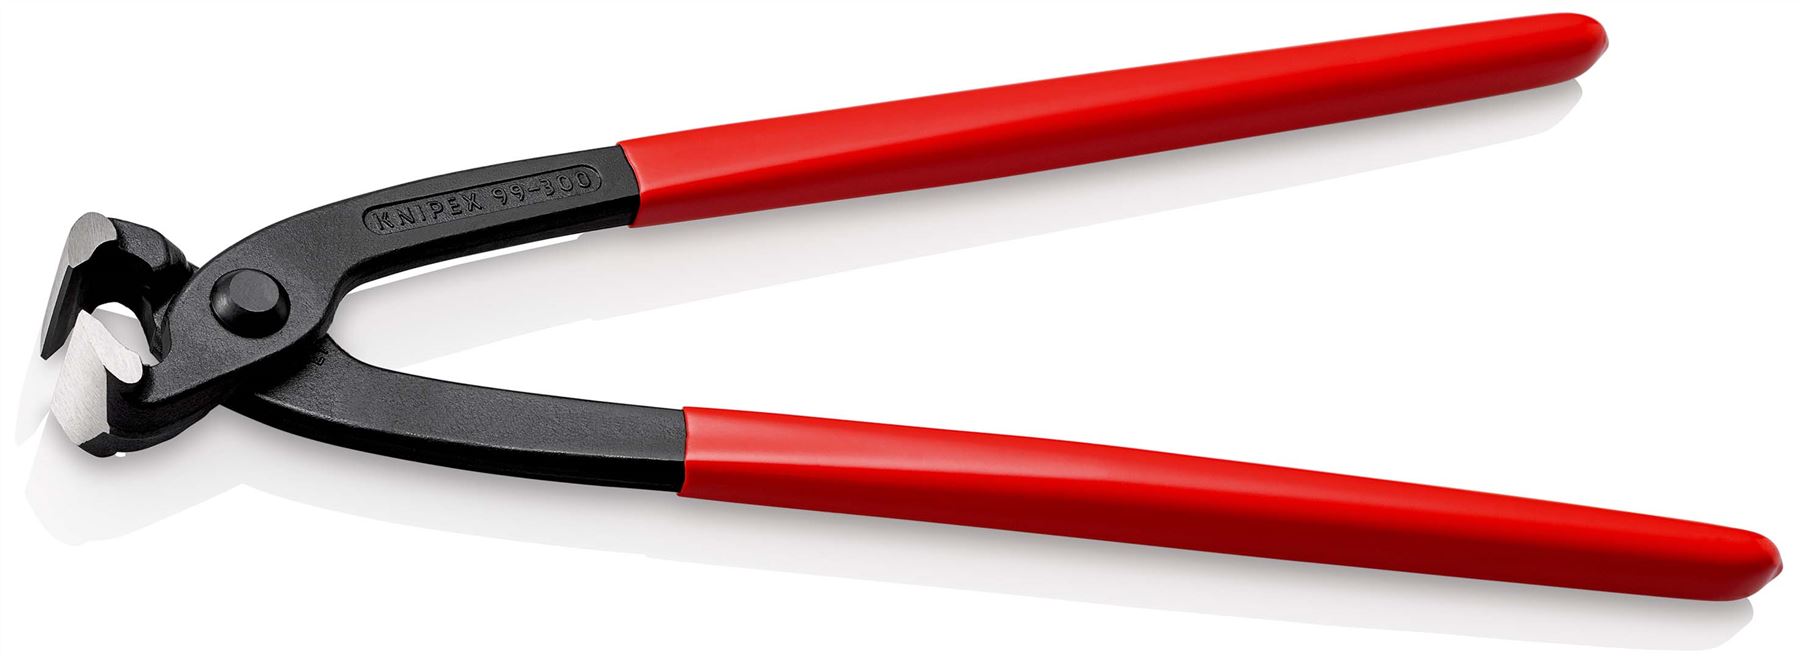 KNIPEX Concreters Nipper Pliers 300mm Plastic Coated Handles 99 01 300